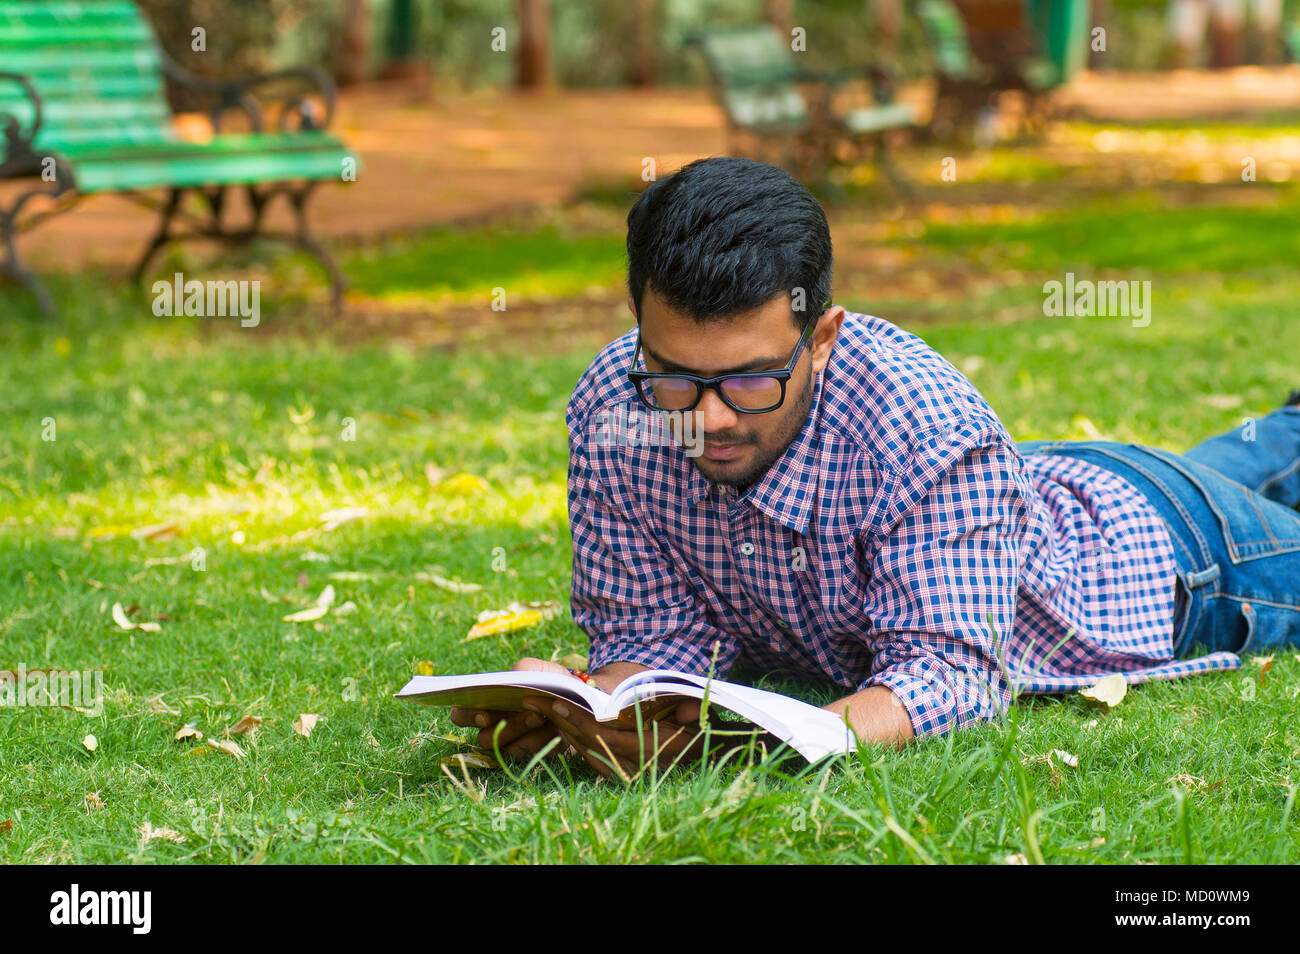 Handsome young boy reading while lying on grass in park Stock Photo